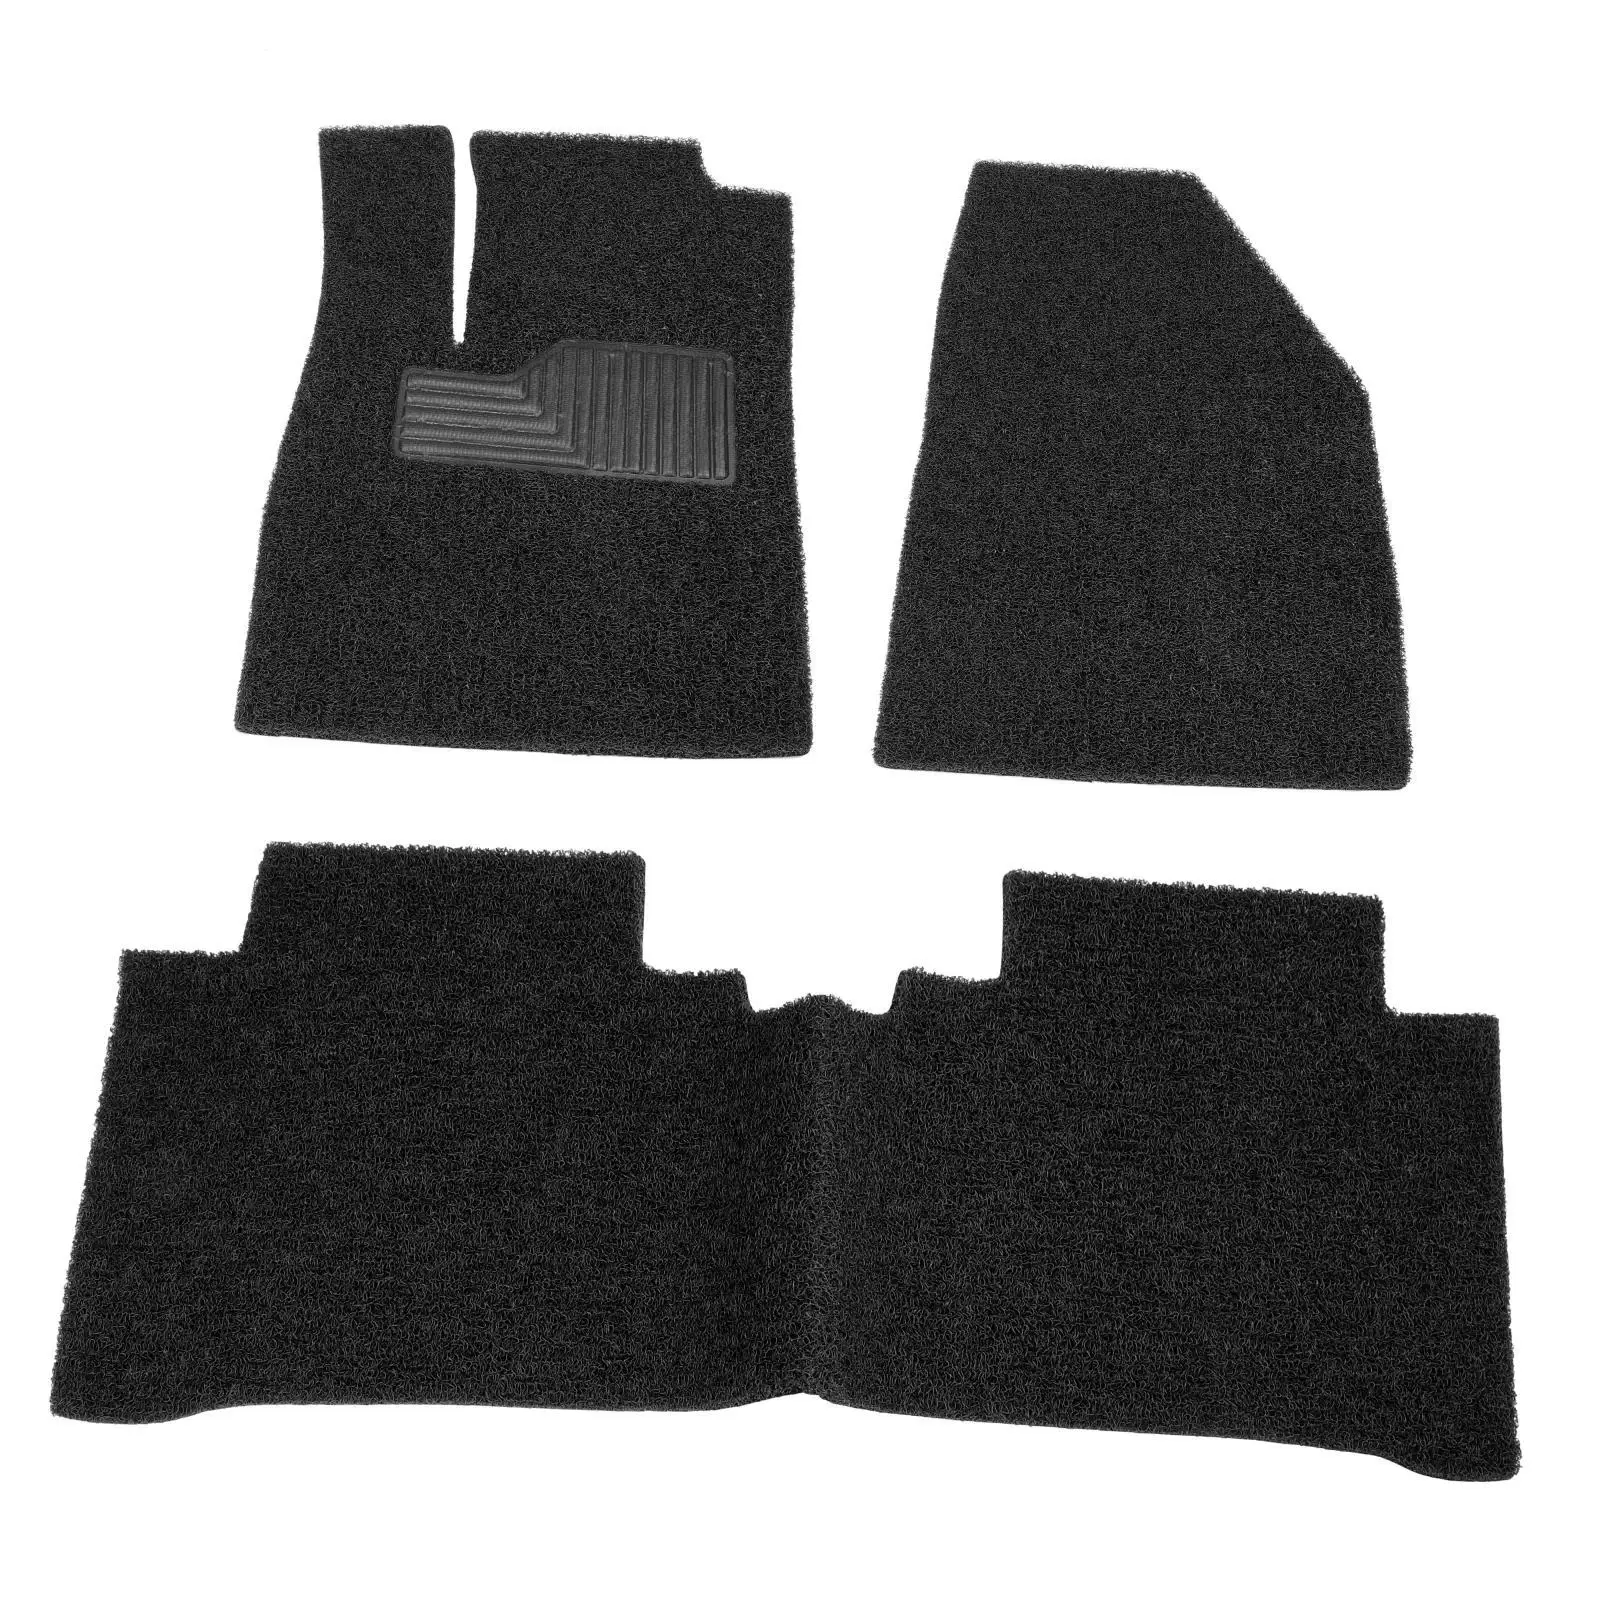 3Pcs Car Floor Mats Protection High Toughness PVC Comfortable Easy to Clean for Byd Yuan Plus Atto 3 21-23